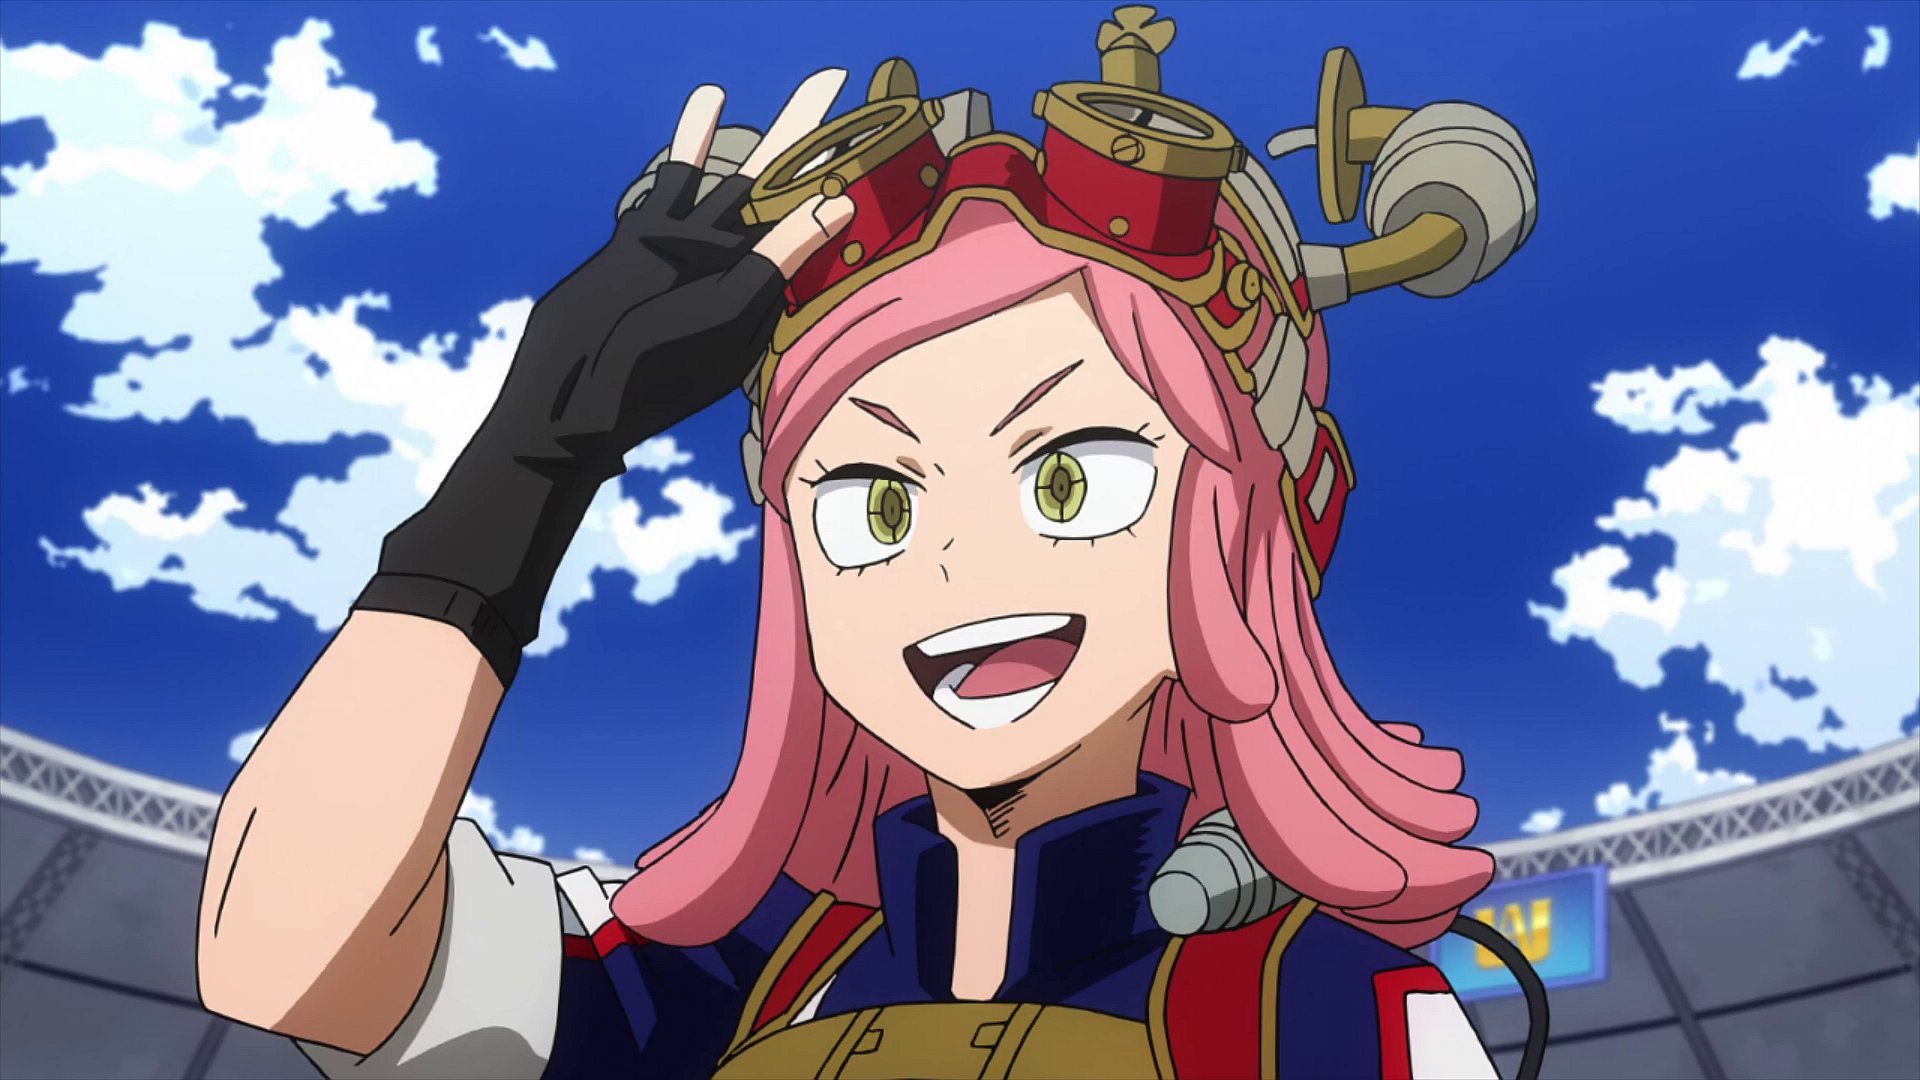 Reference Emporium of Mei Hatsume from My Hero Academia. Albums or